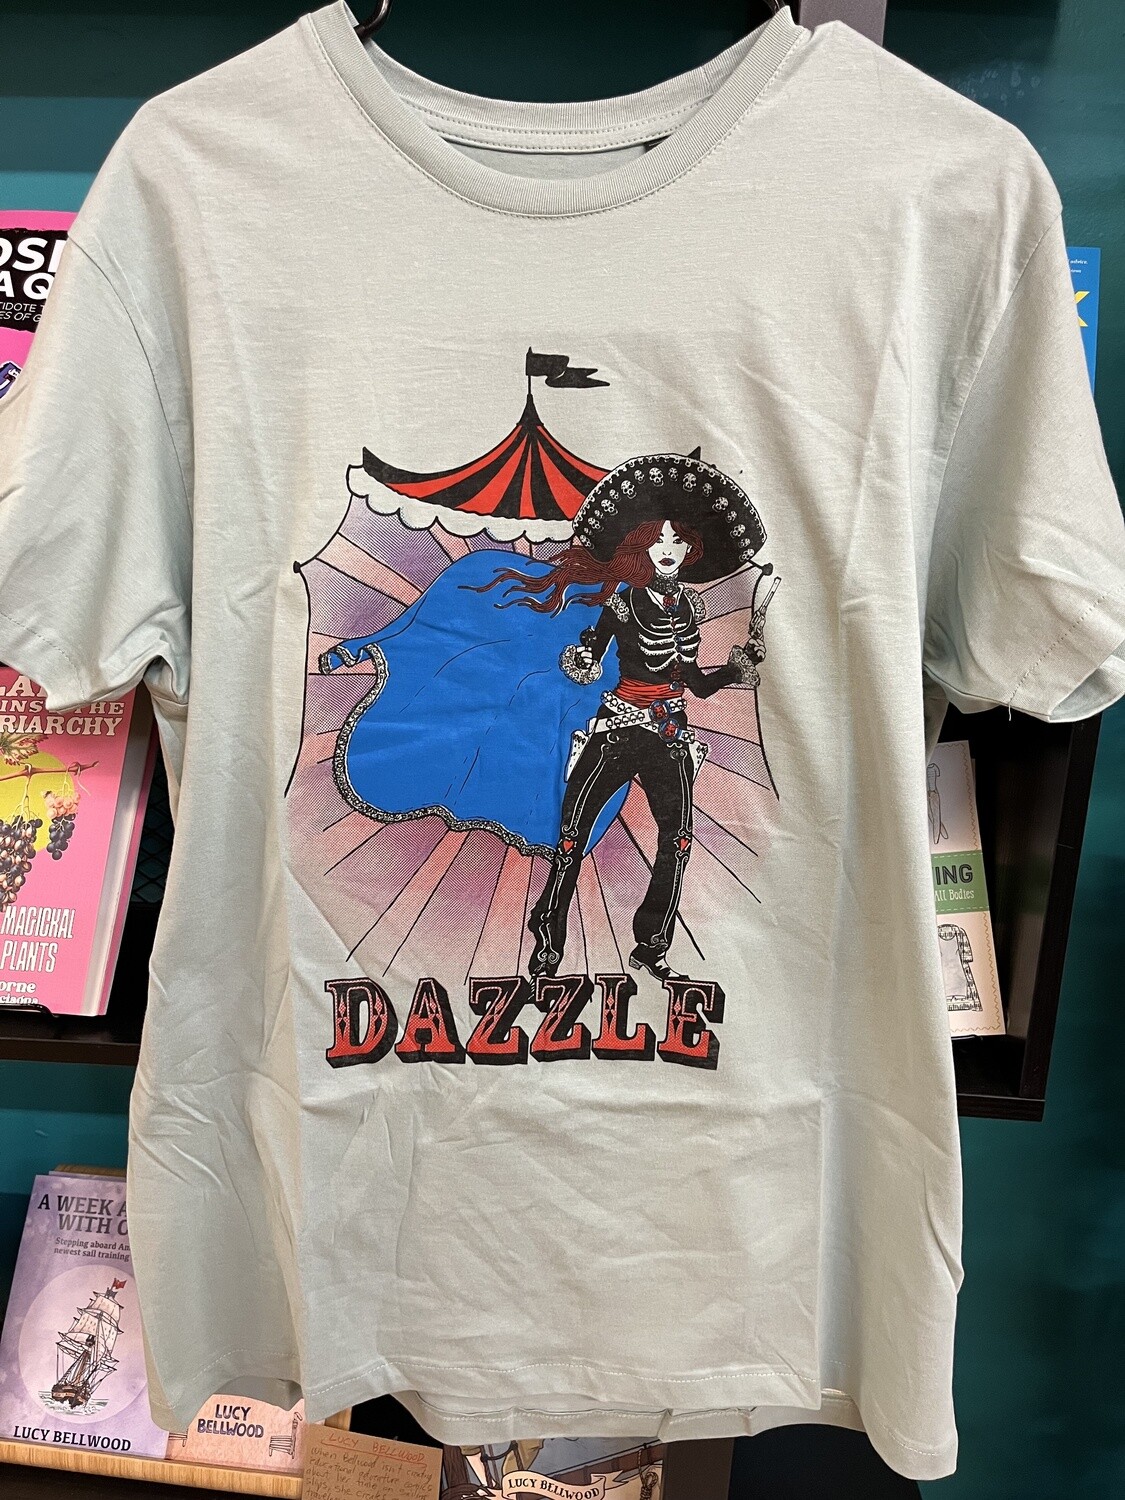 Anabelle, Dazzle Circus - T-shirt by Andrew Villone